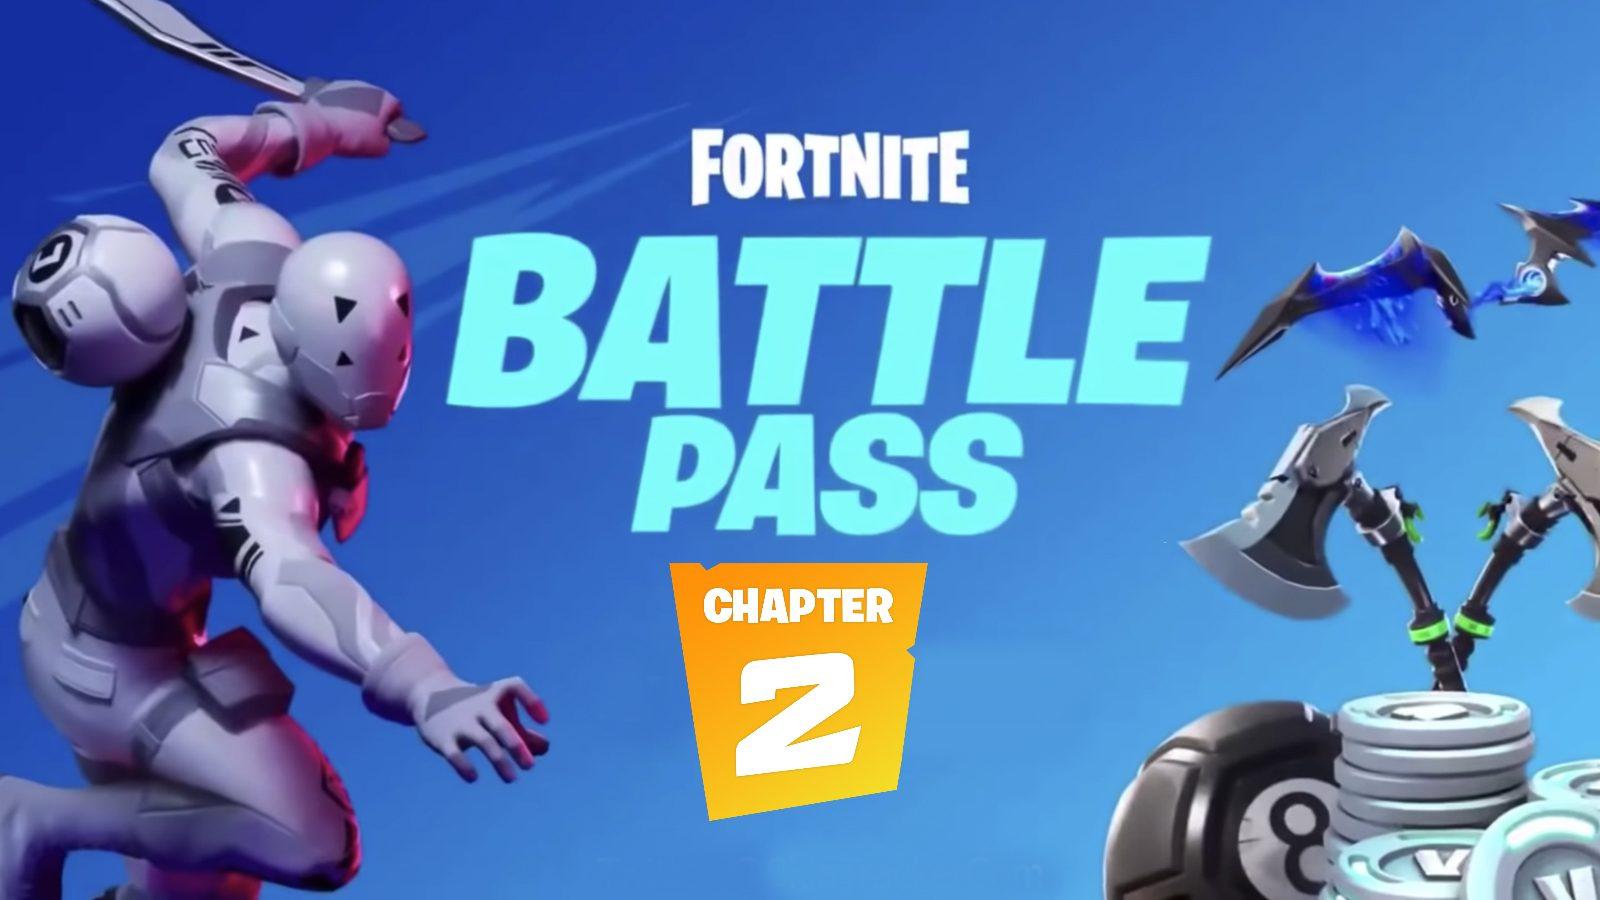 What's in the Fortnite Chapter 2 Battle Pass? All tiers